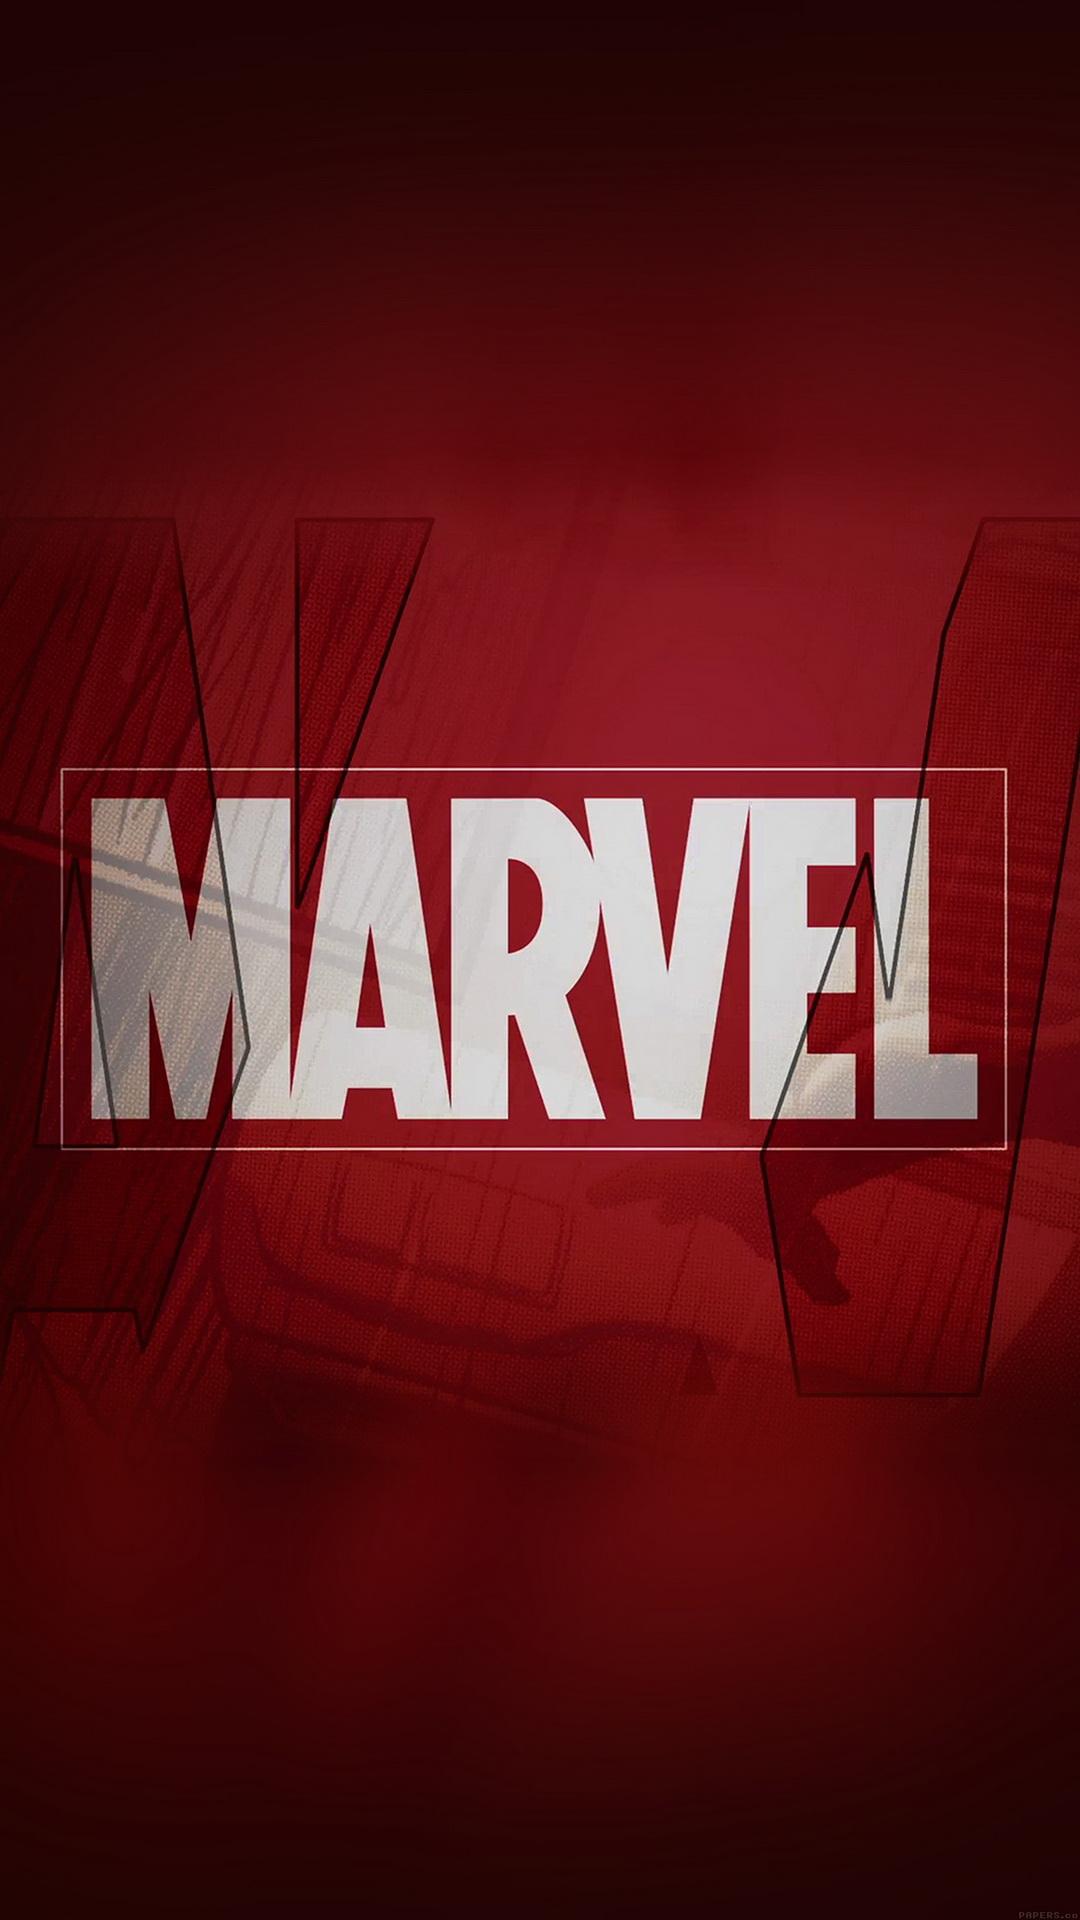 Marvel logo htc one wallpaper, free and easy to download